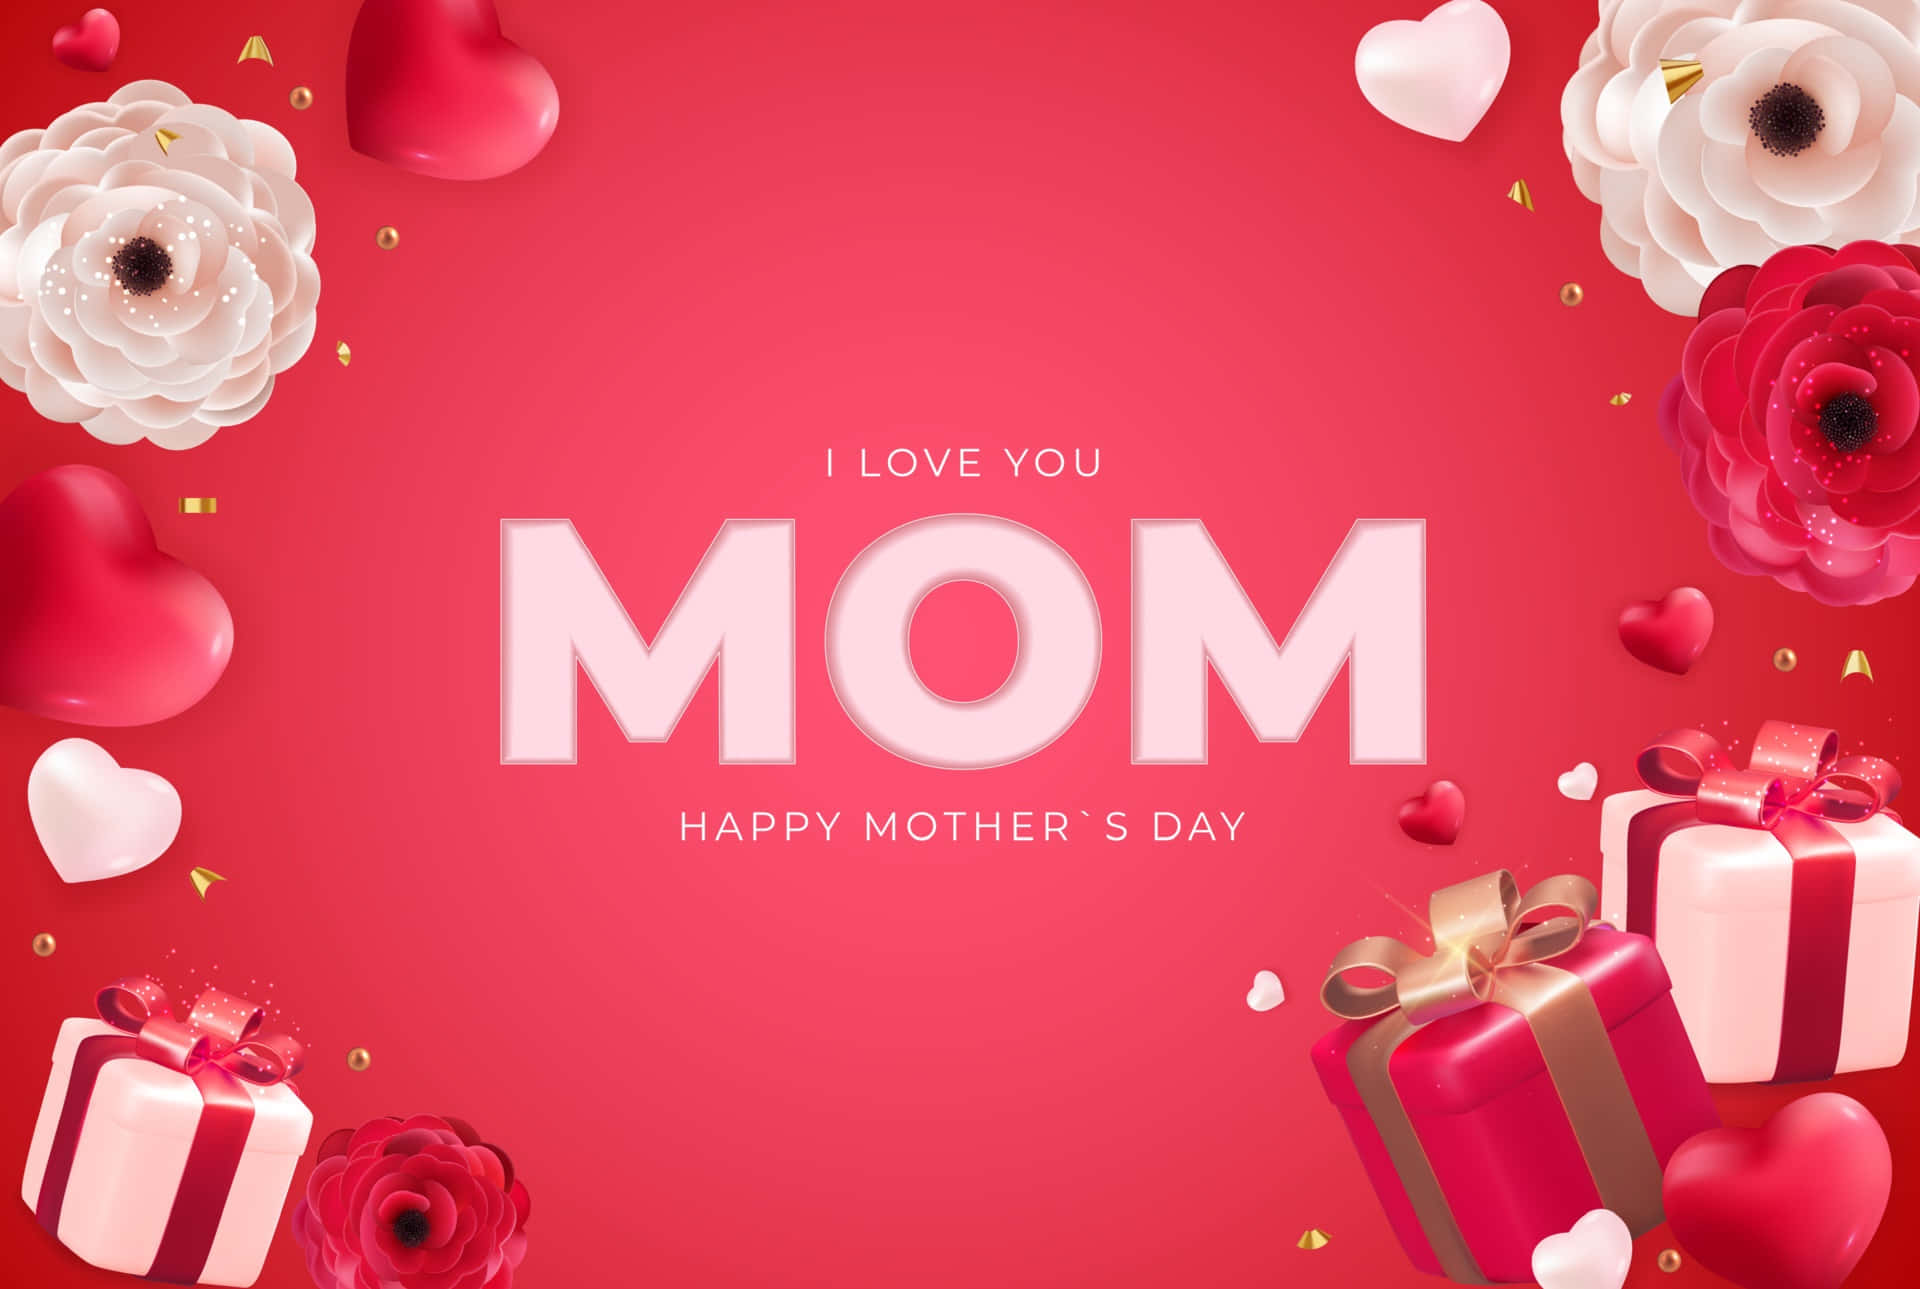 Happy Mother's Day Greetings With Gifts And Flowers